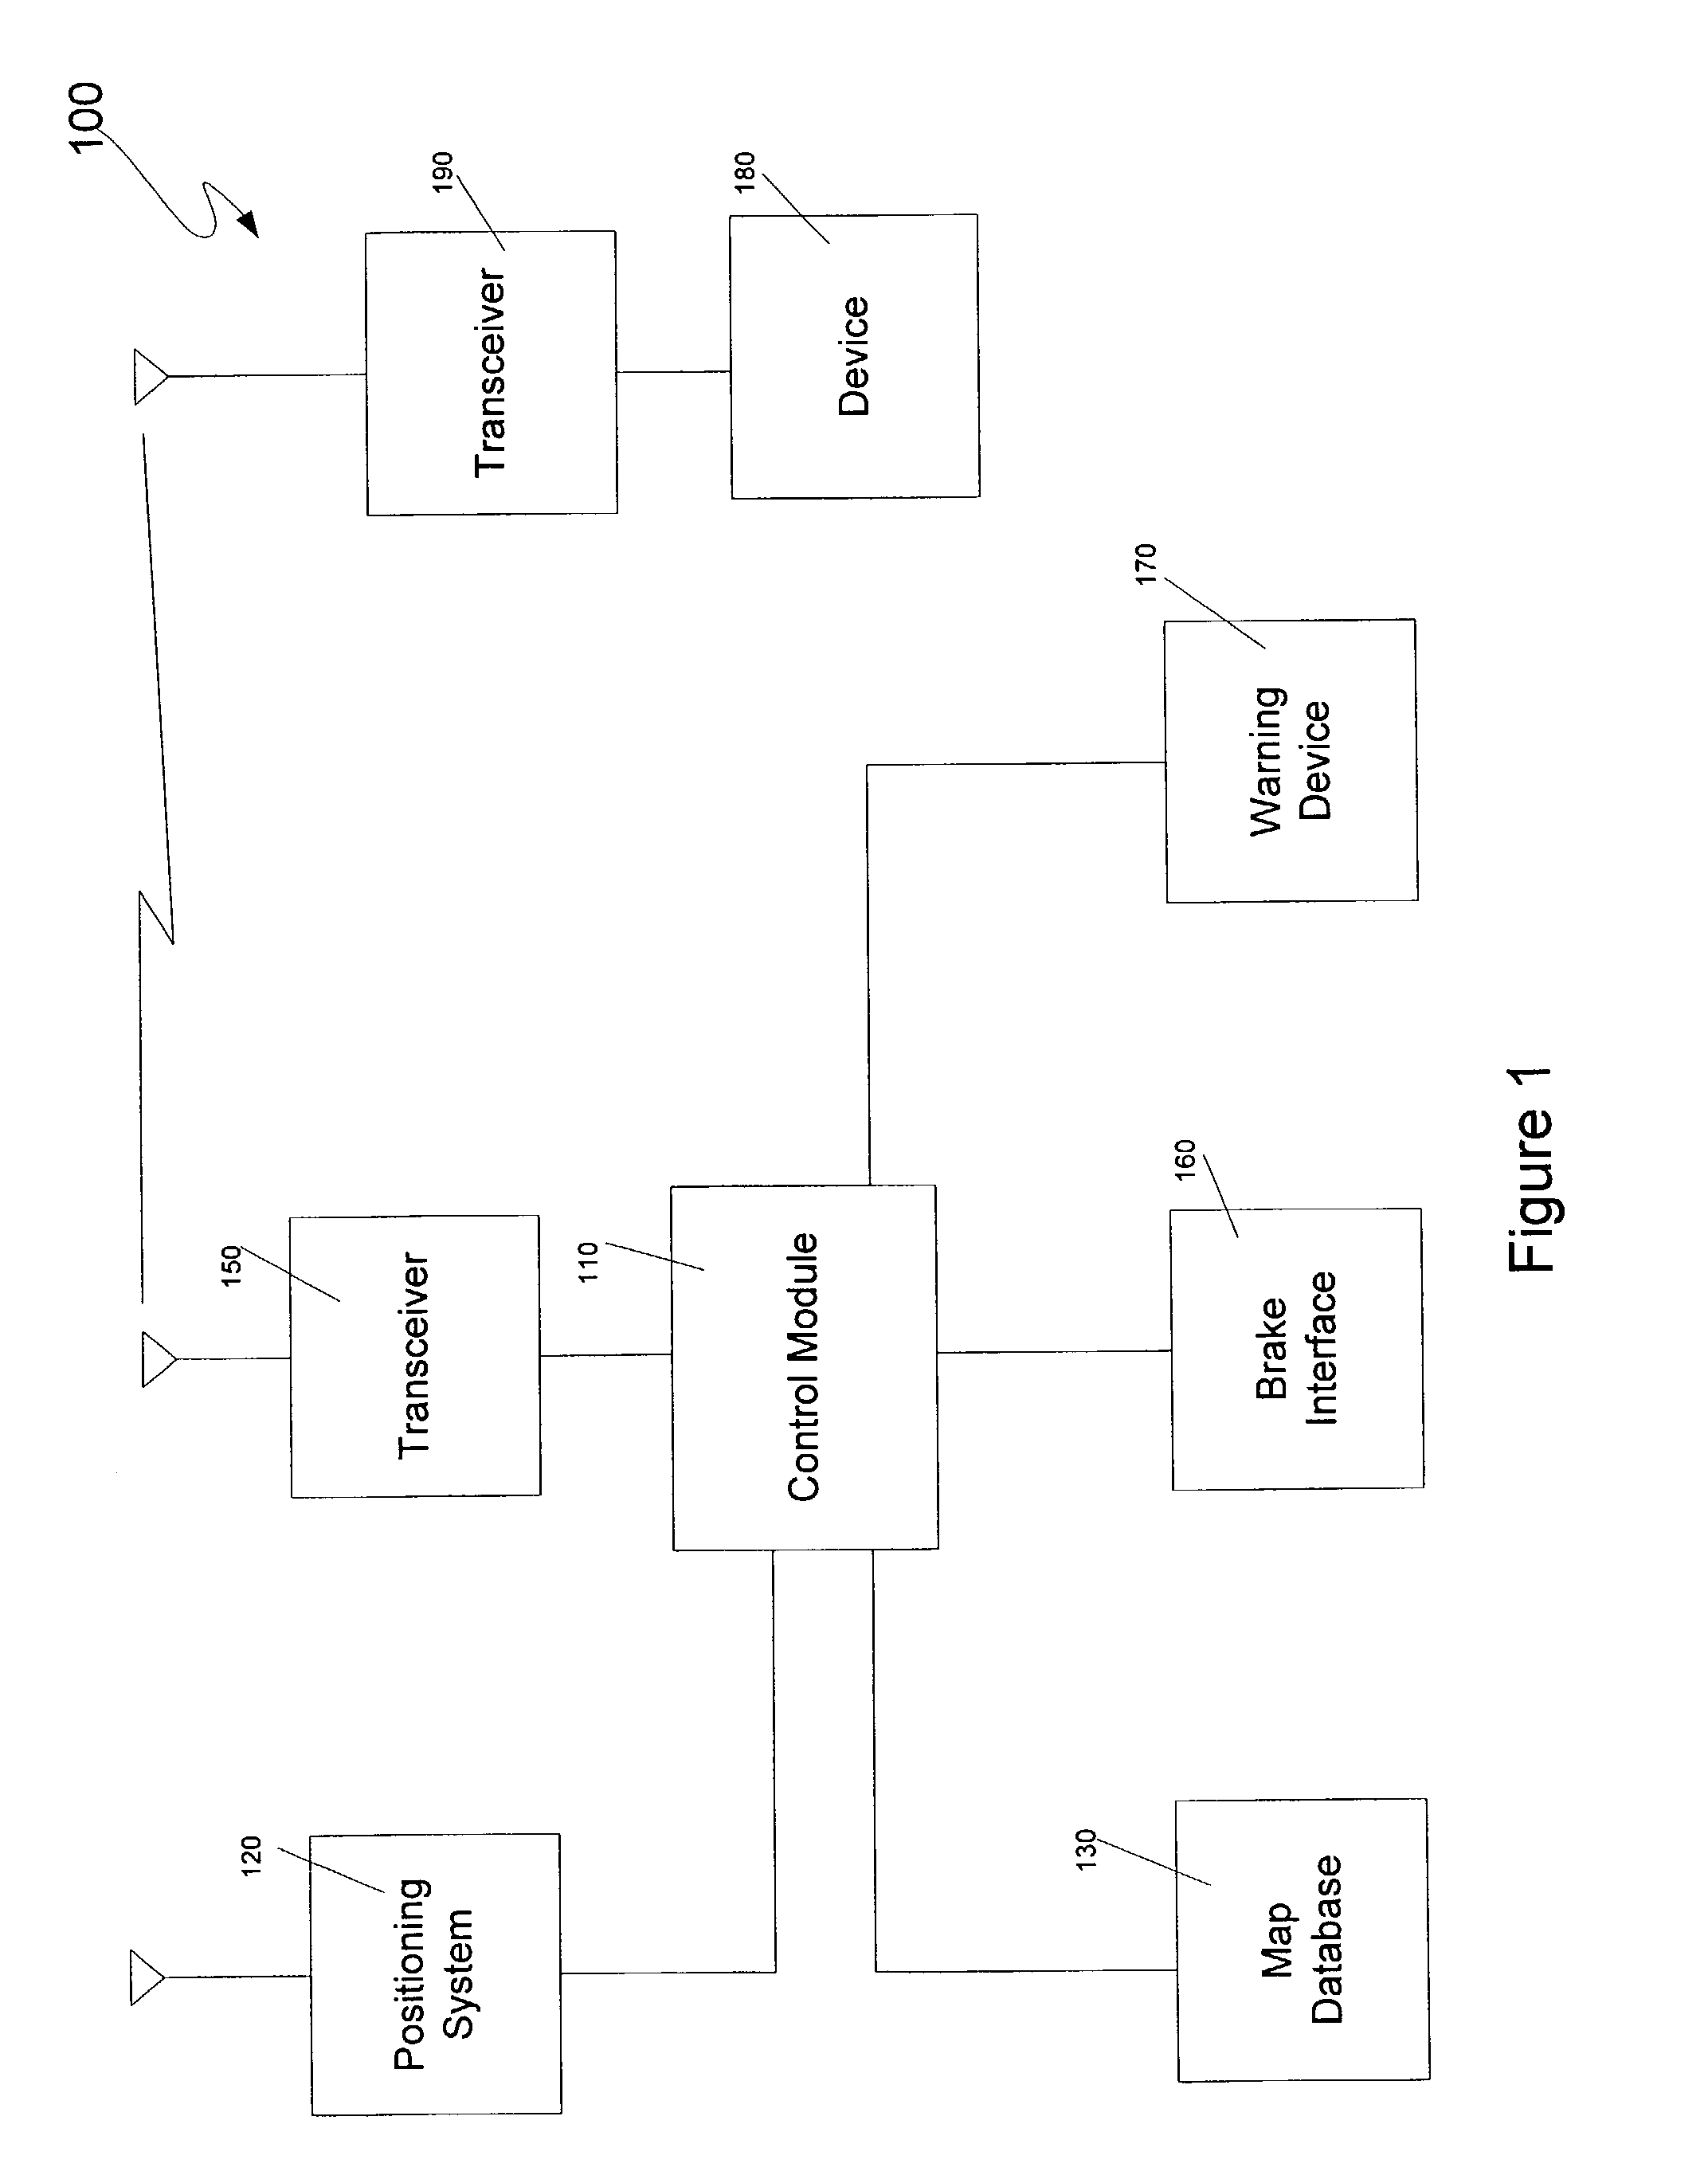 Method and system for ensuring that a train does not pass an improperly configured device